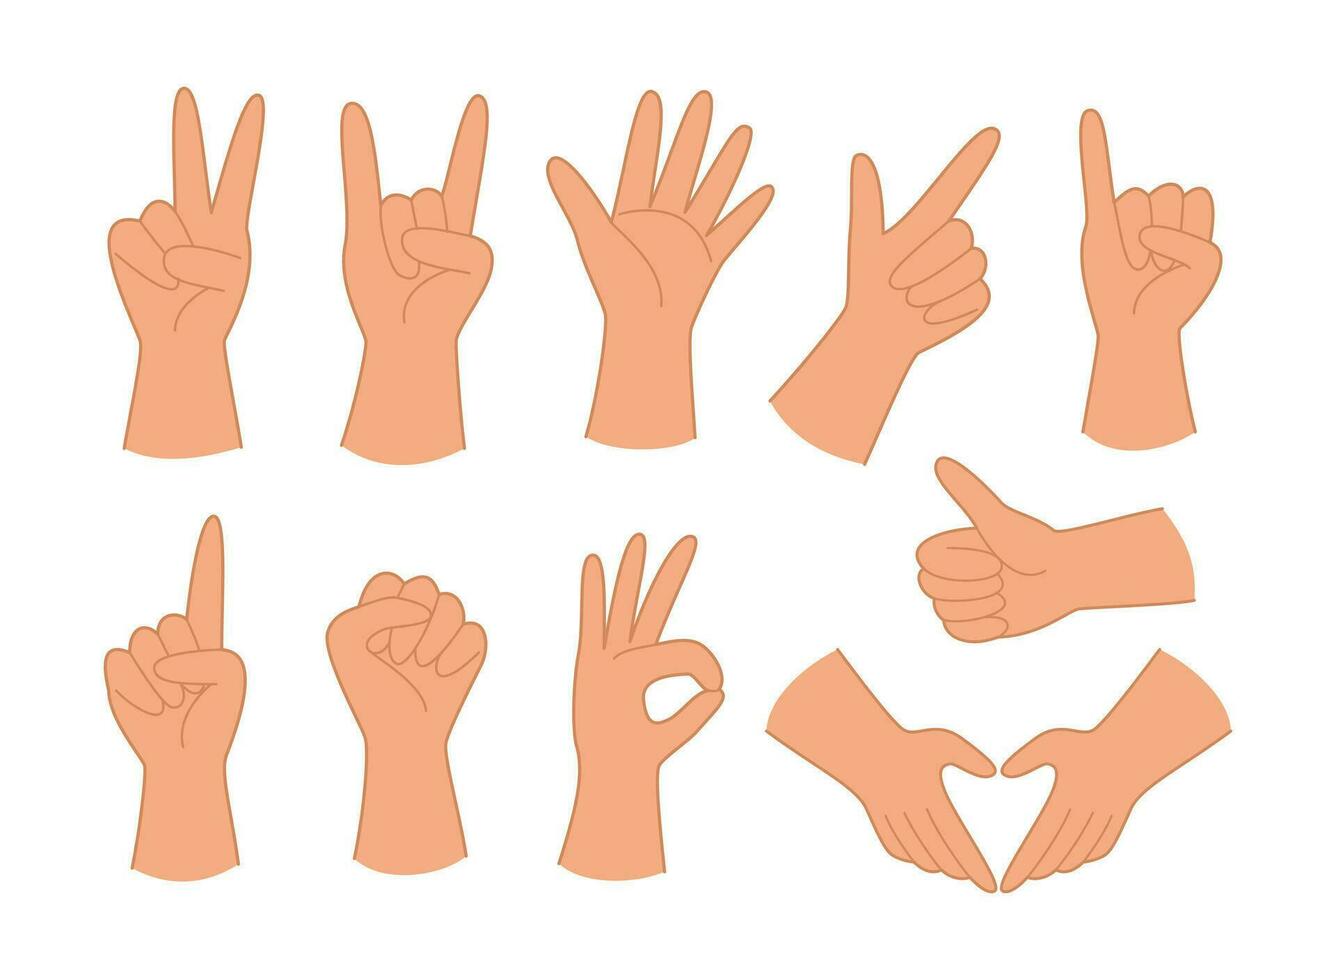 Set of Hands Showing Different Gestures for Signal Language Concept Illustration vector